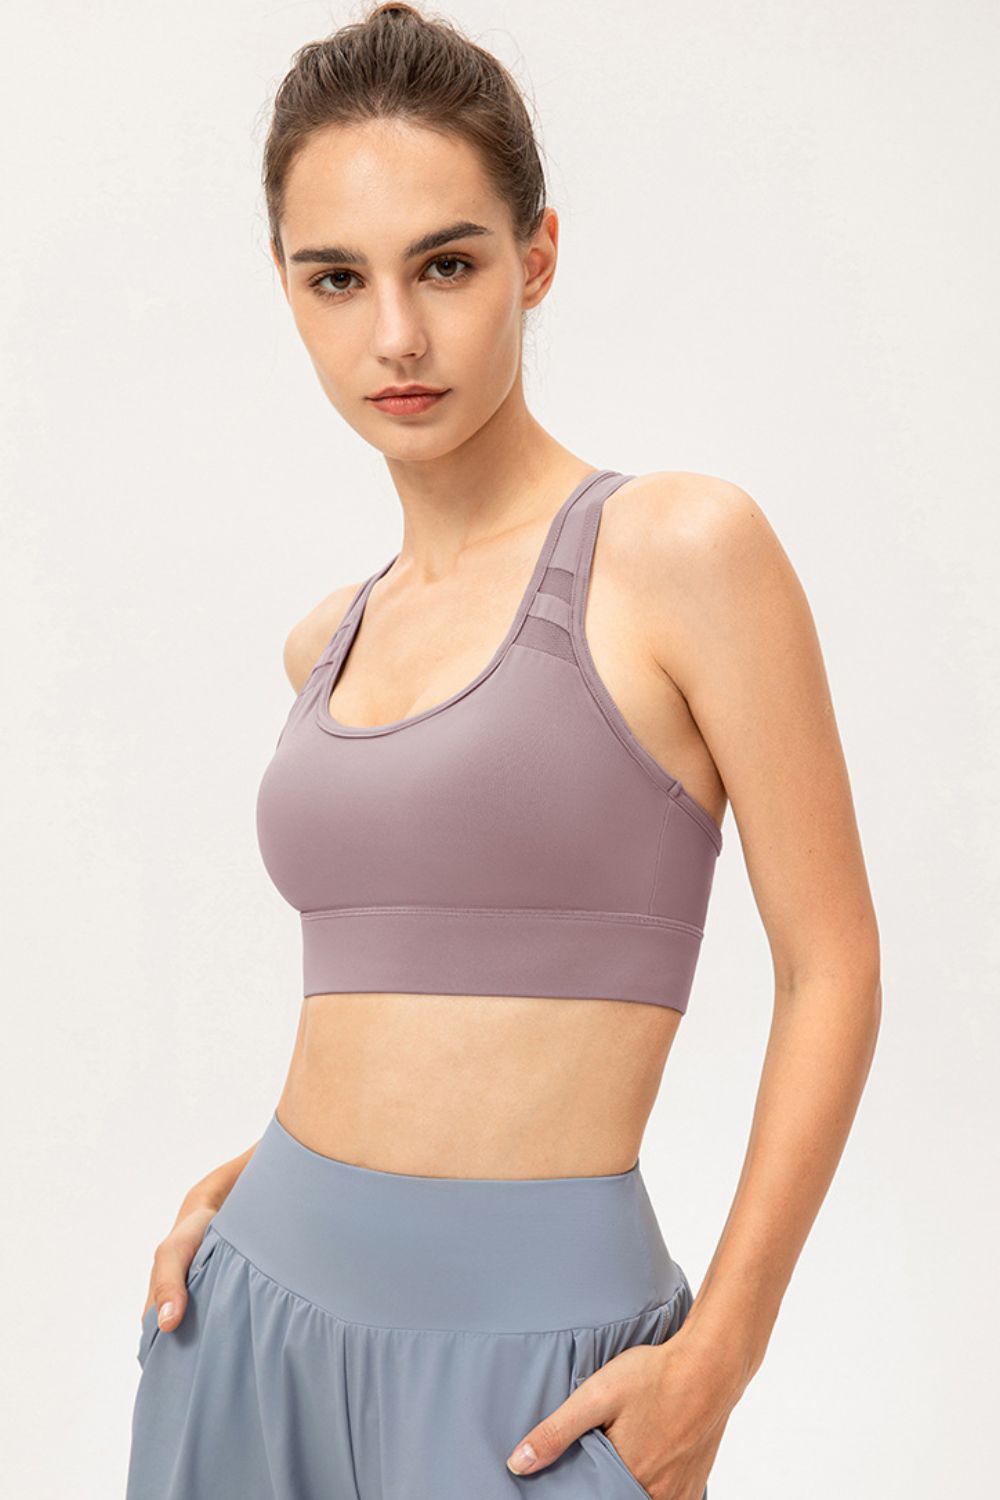 Scoop Neck Long Sports Bra Print on any thing USA/STOD clothes